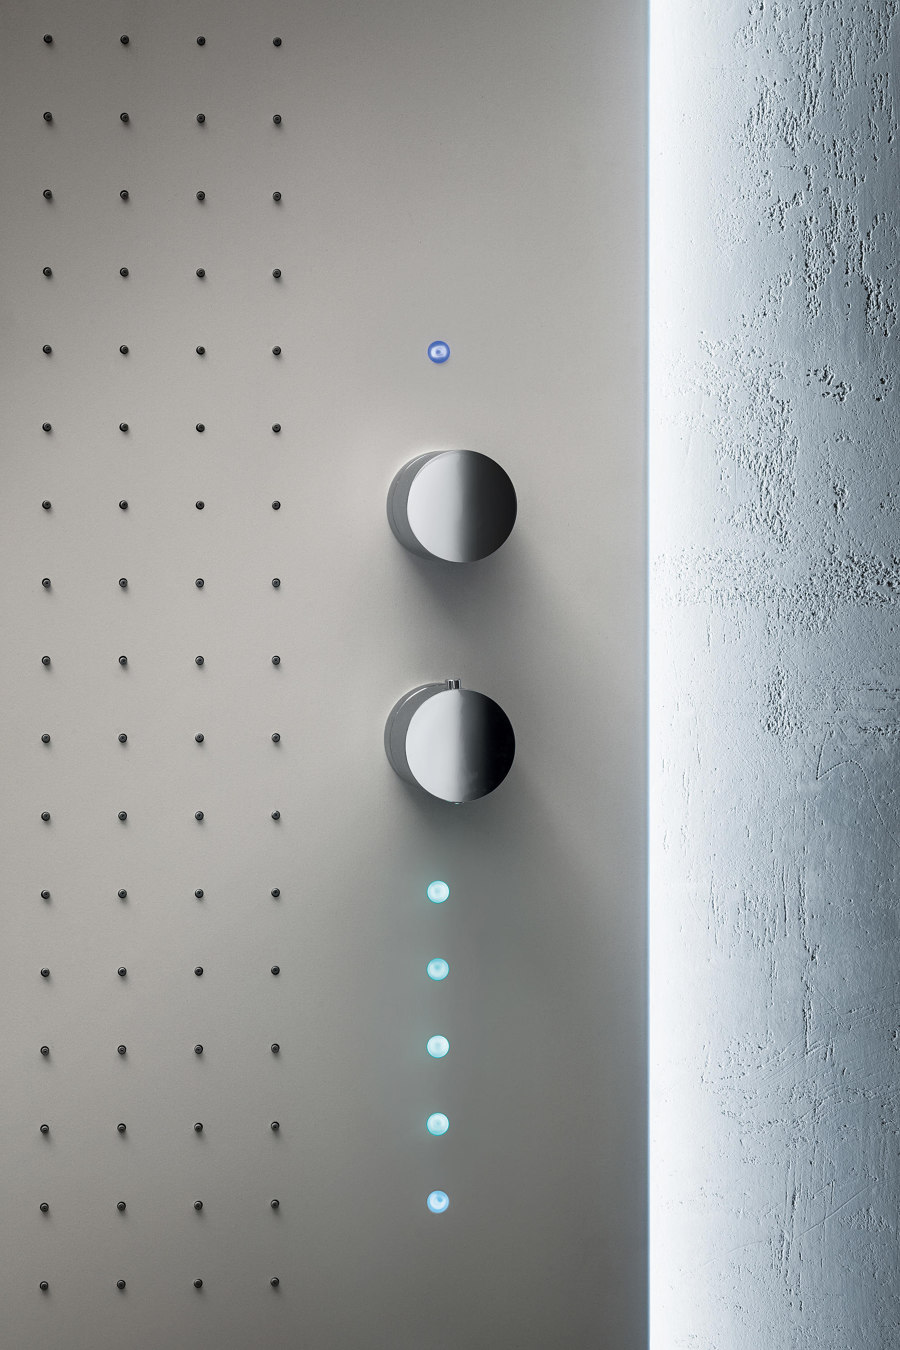 Ten functional shower control systems dripping with style | Aktuelles